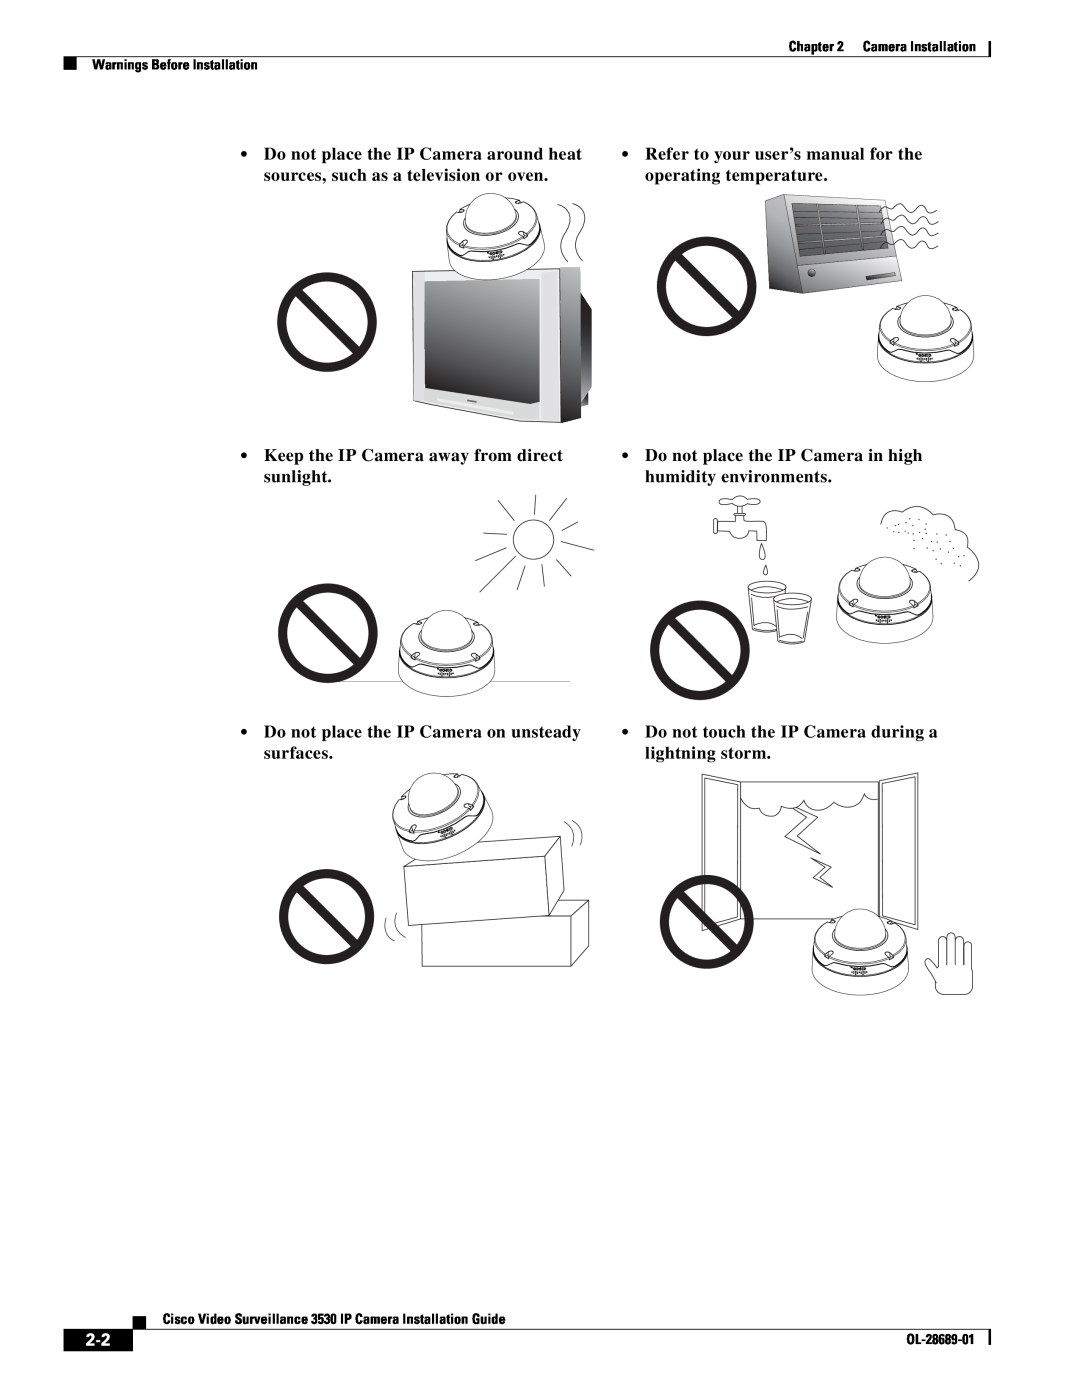 Cisco Systems 3530 manual Keep the IP Camera away from direct sunlight, Do not place the IP Camera on unsteady surfaces 